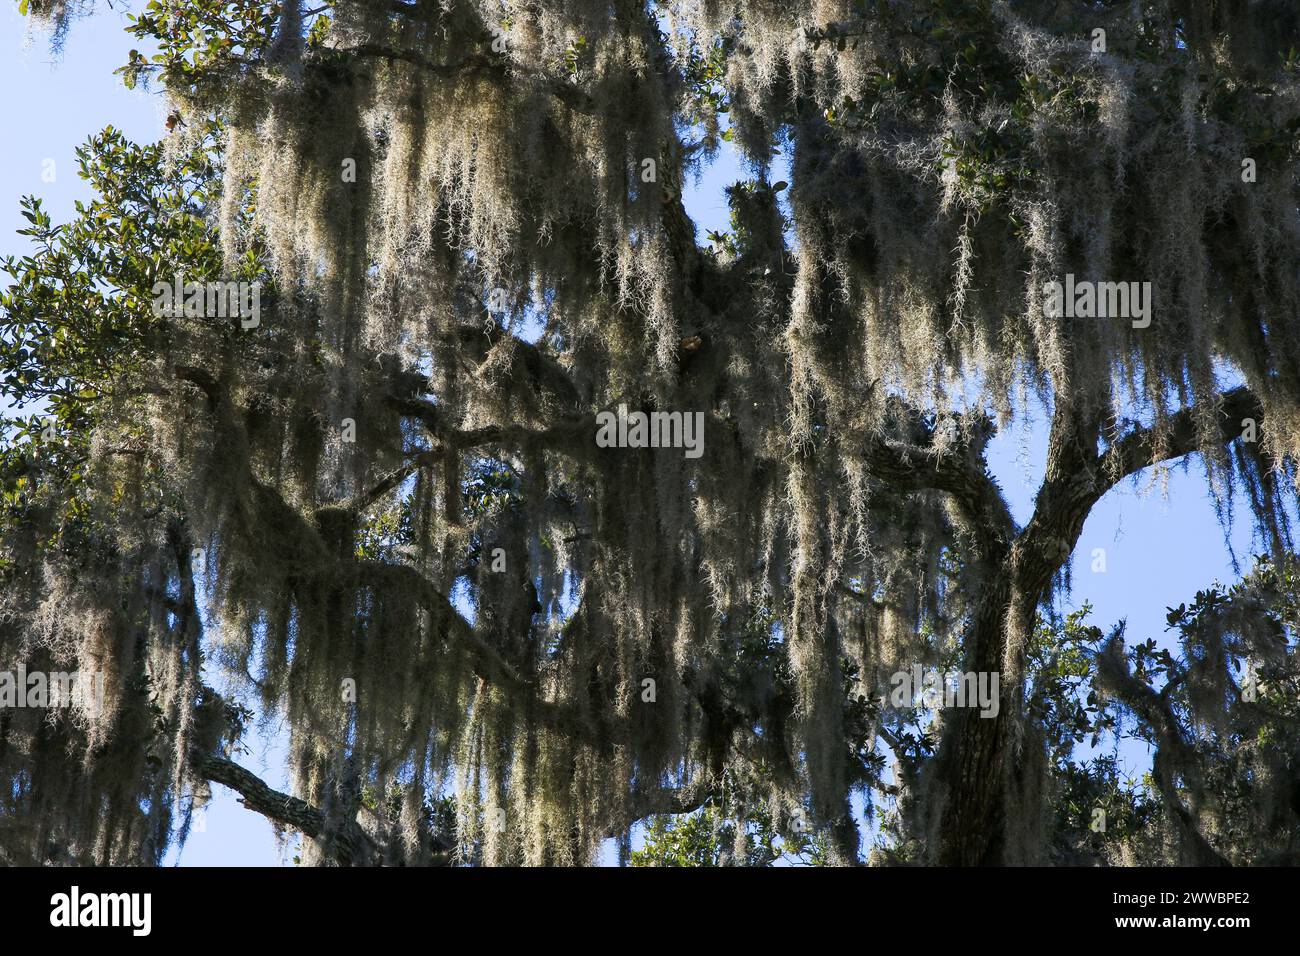 Looking up at Spanish Moss hanging from a large tree in Beufort Sout Carolina Stock Photo